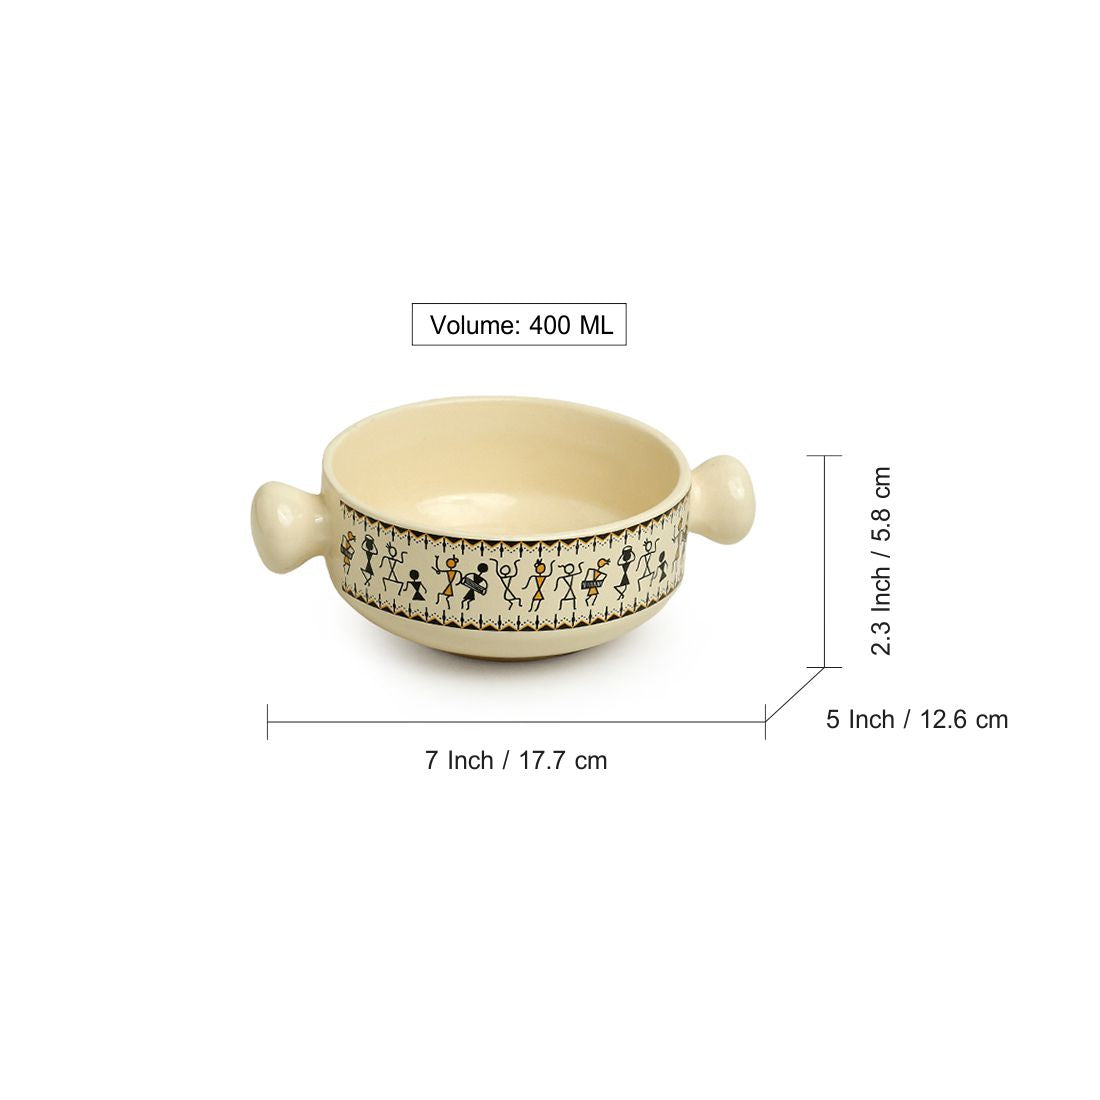 'Whispers of Warli' Handcrafted Ceramic Serving Bowls (Set of 2, 400 ML, Microwave Safe)